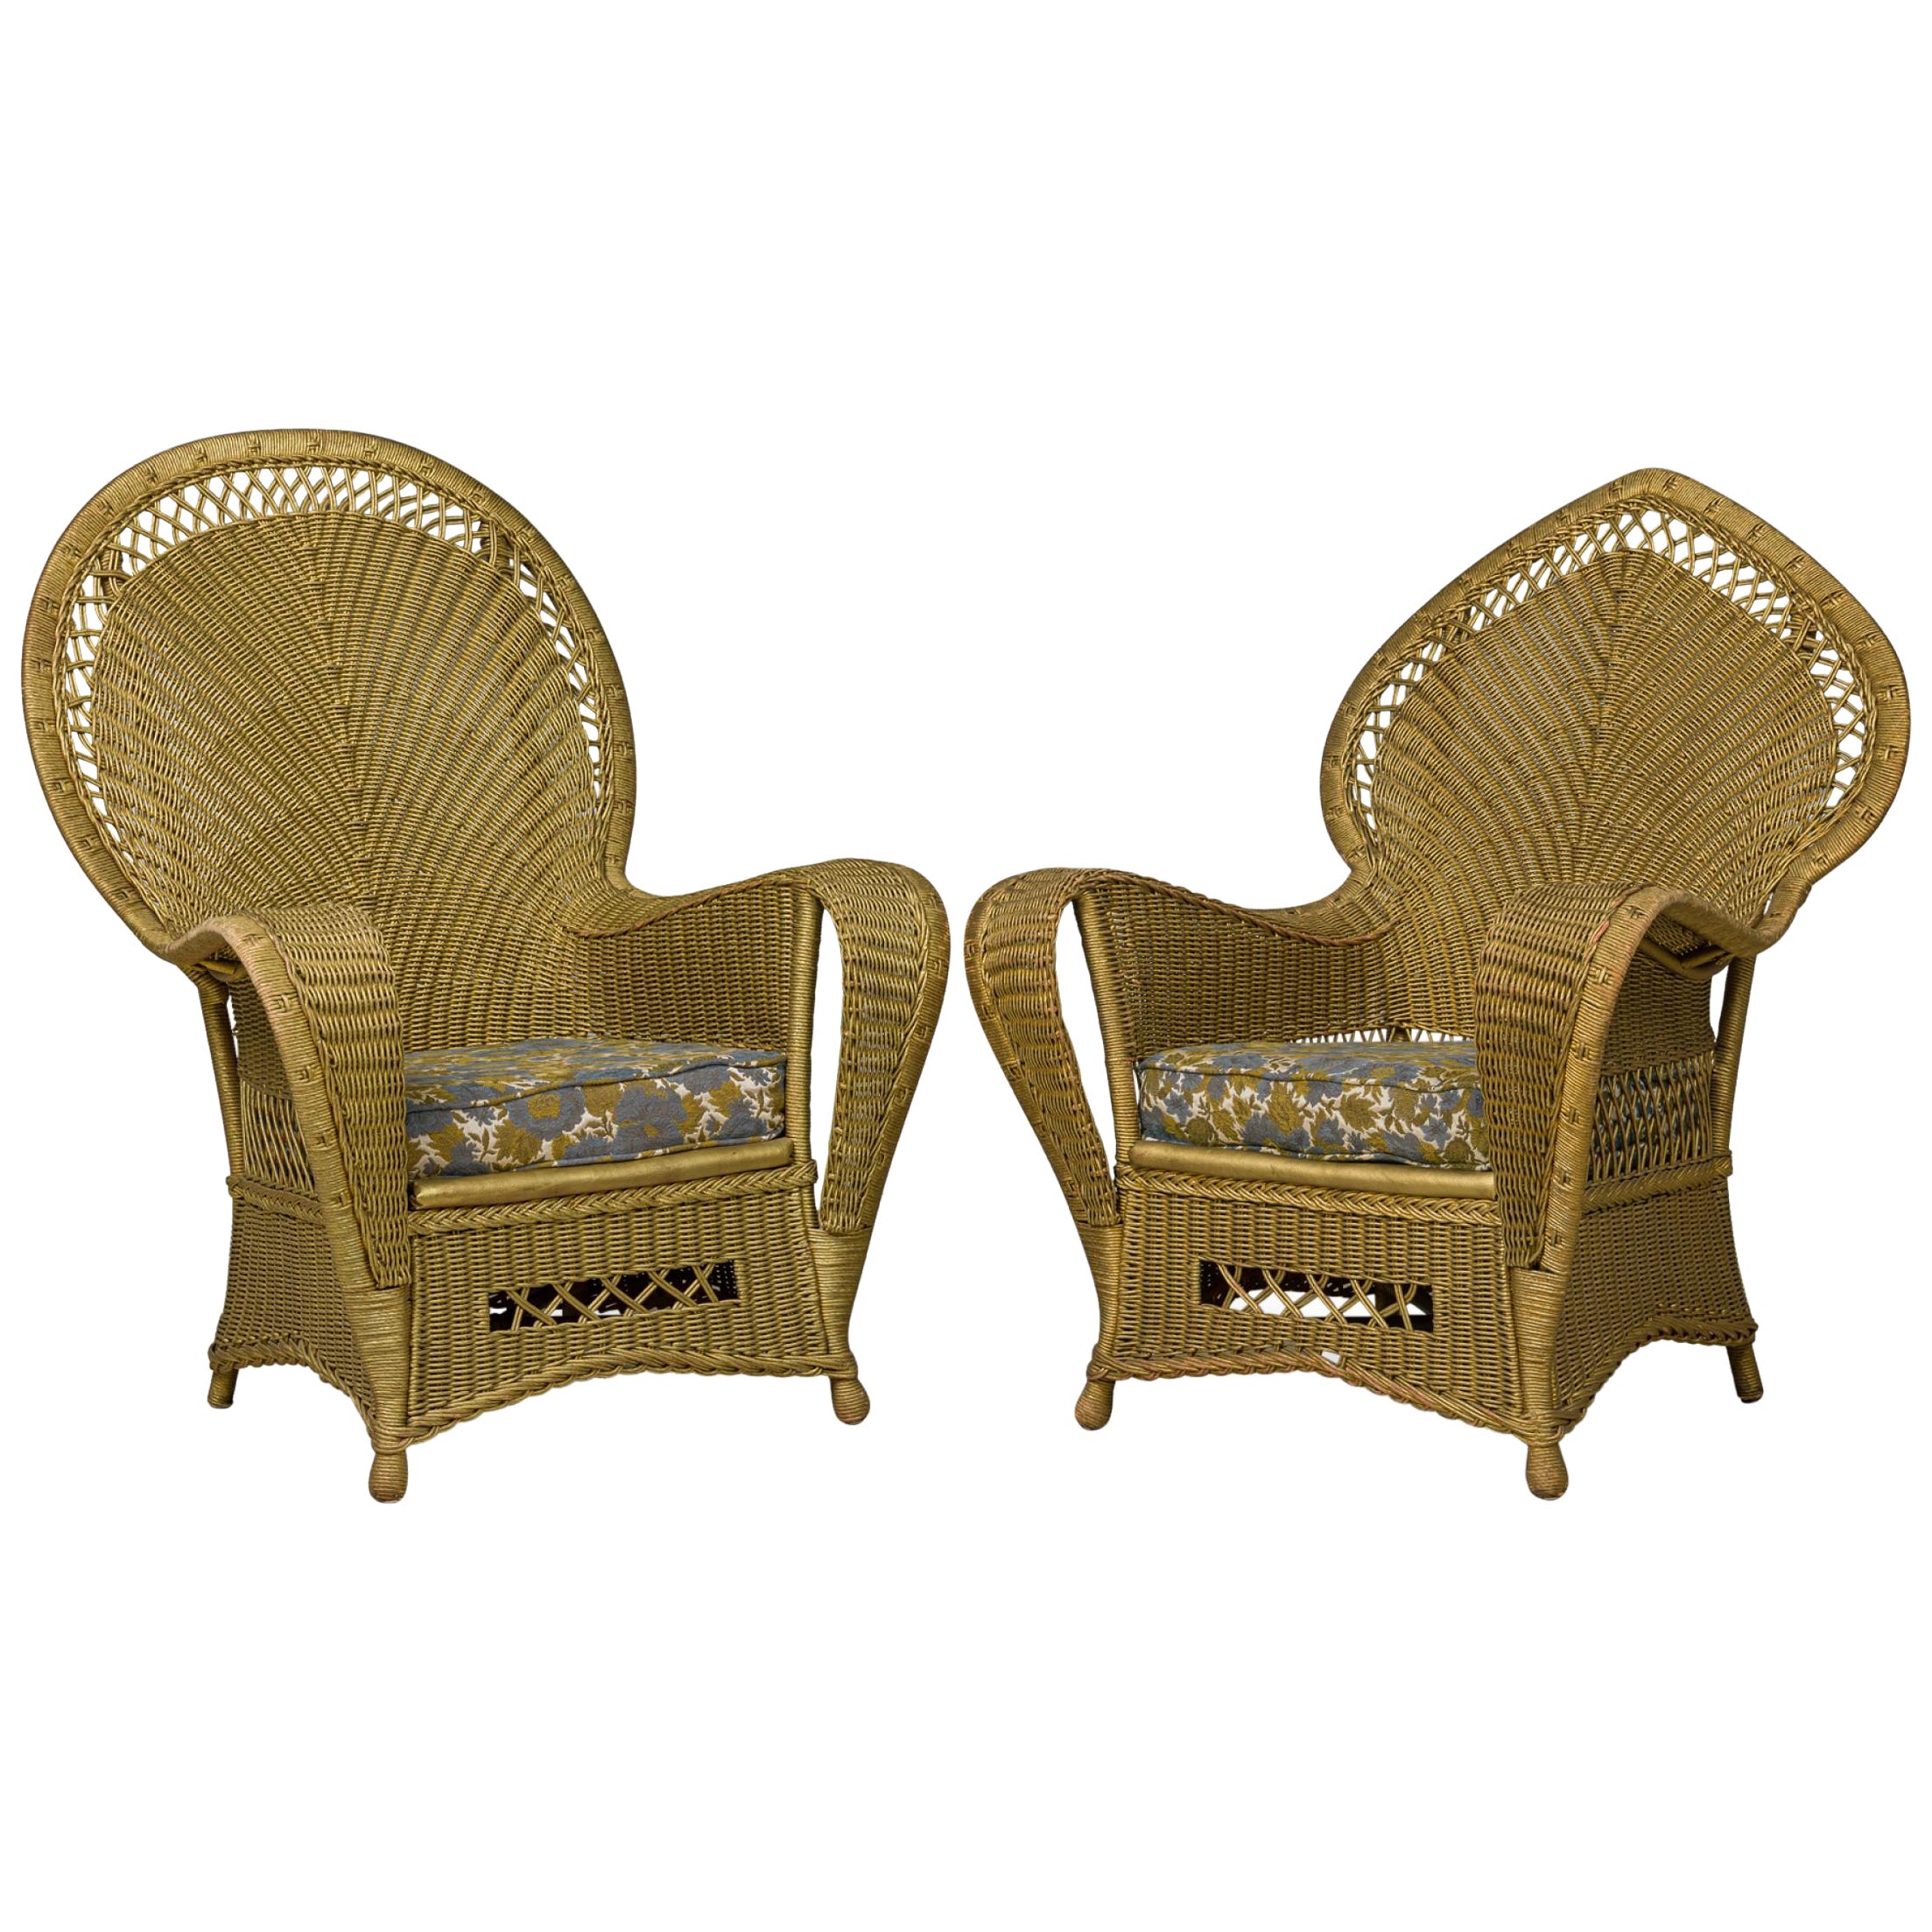 Pair of Similar Art Deco Gold Painted Paper Cord Wicker Armchairs